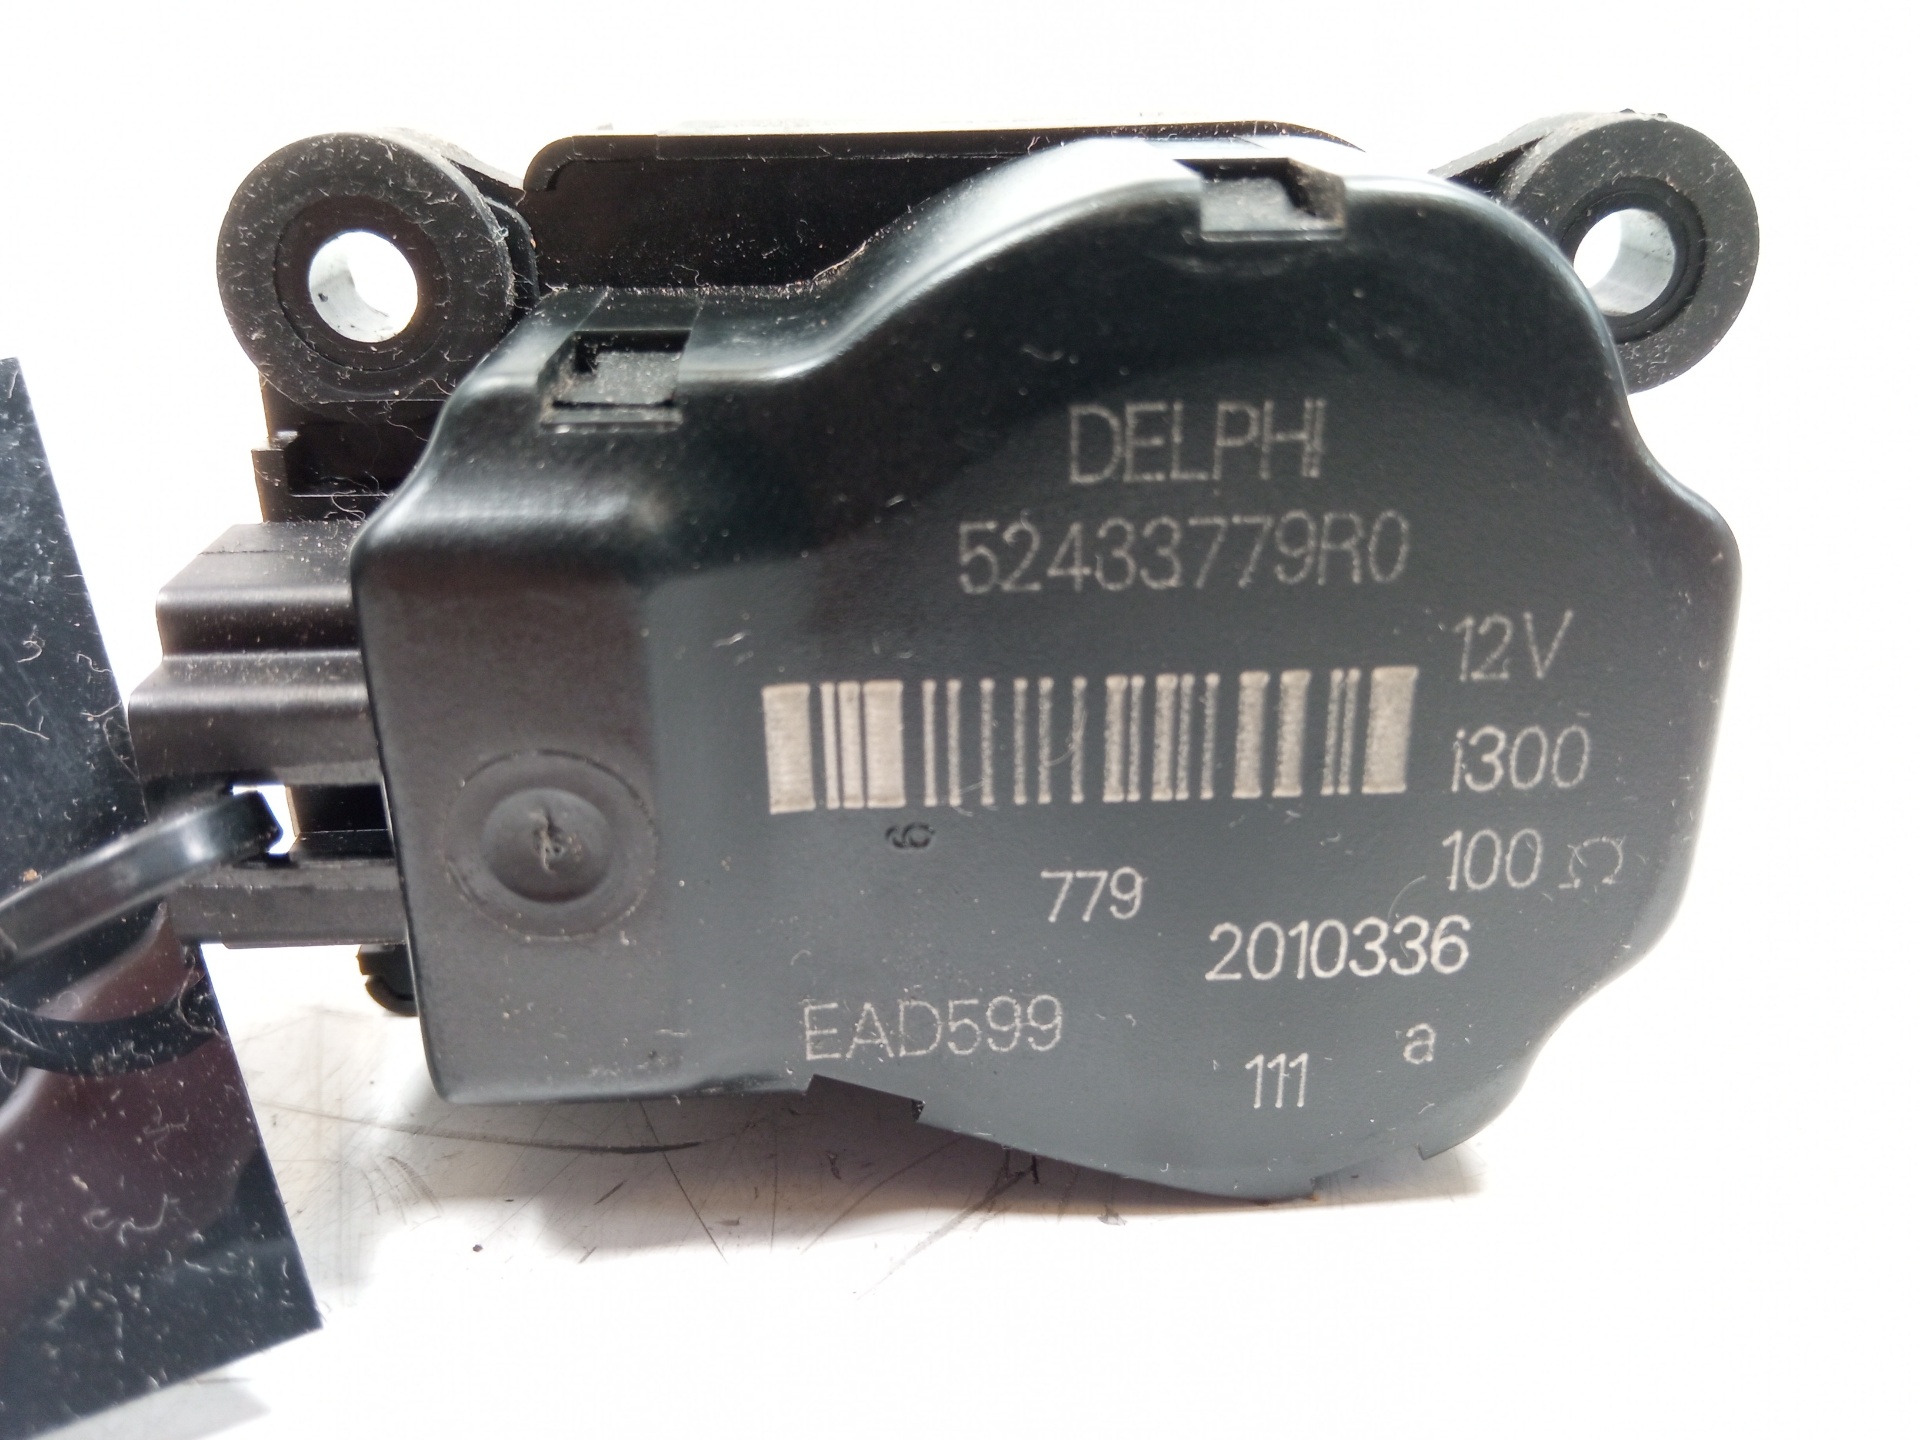 OPEL Insignia A (2008-2016) Air Conditioner Air Flow Valve Motor 52433779R0, 6PINES 24853778